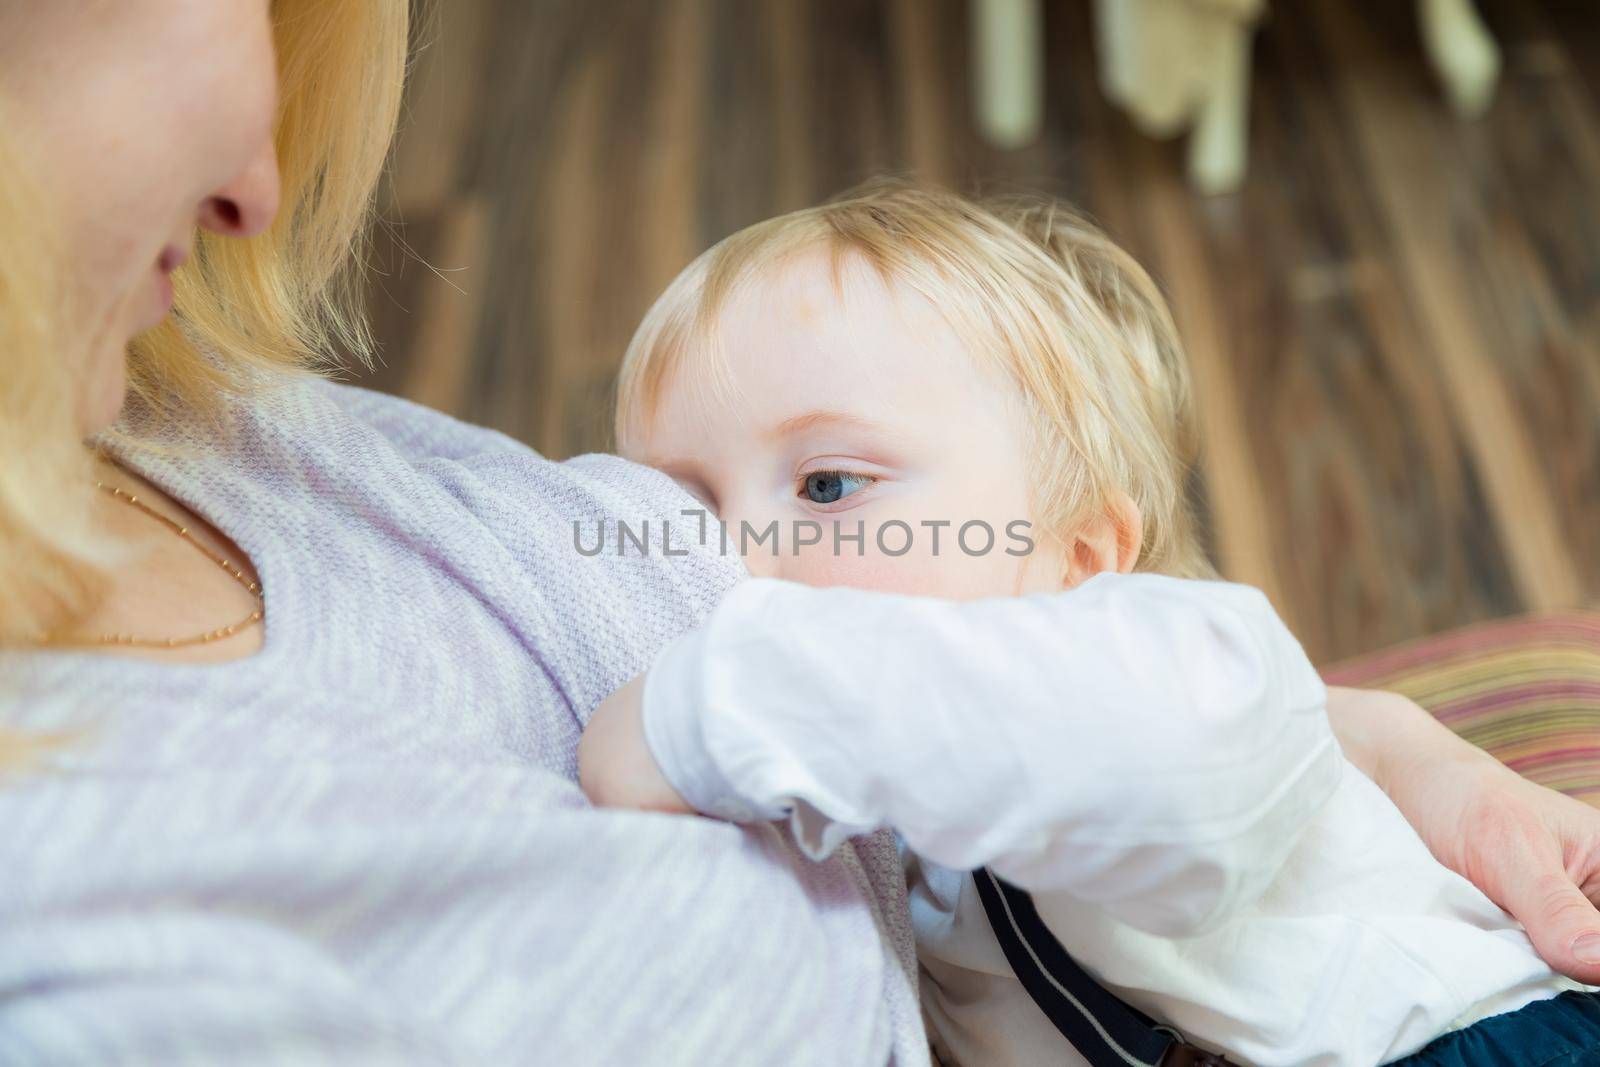 Mom is breastfeeding the baby. She looks at the baby with love and tenderness. Close-up